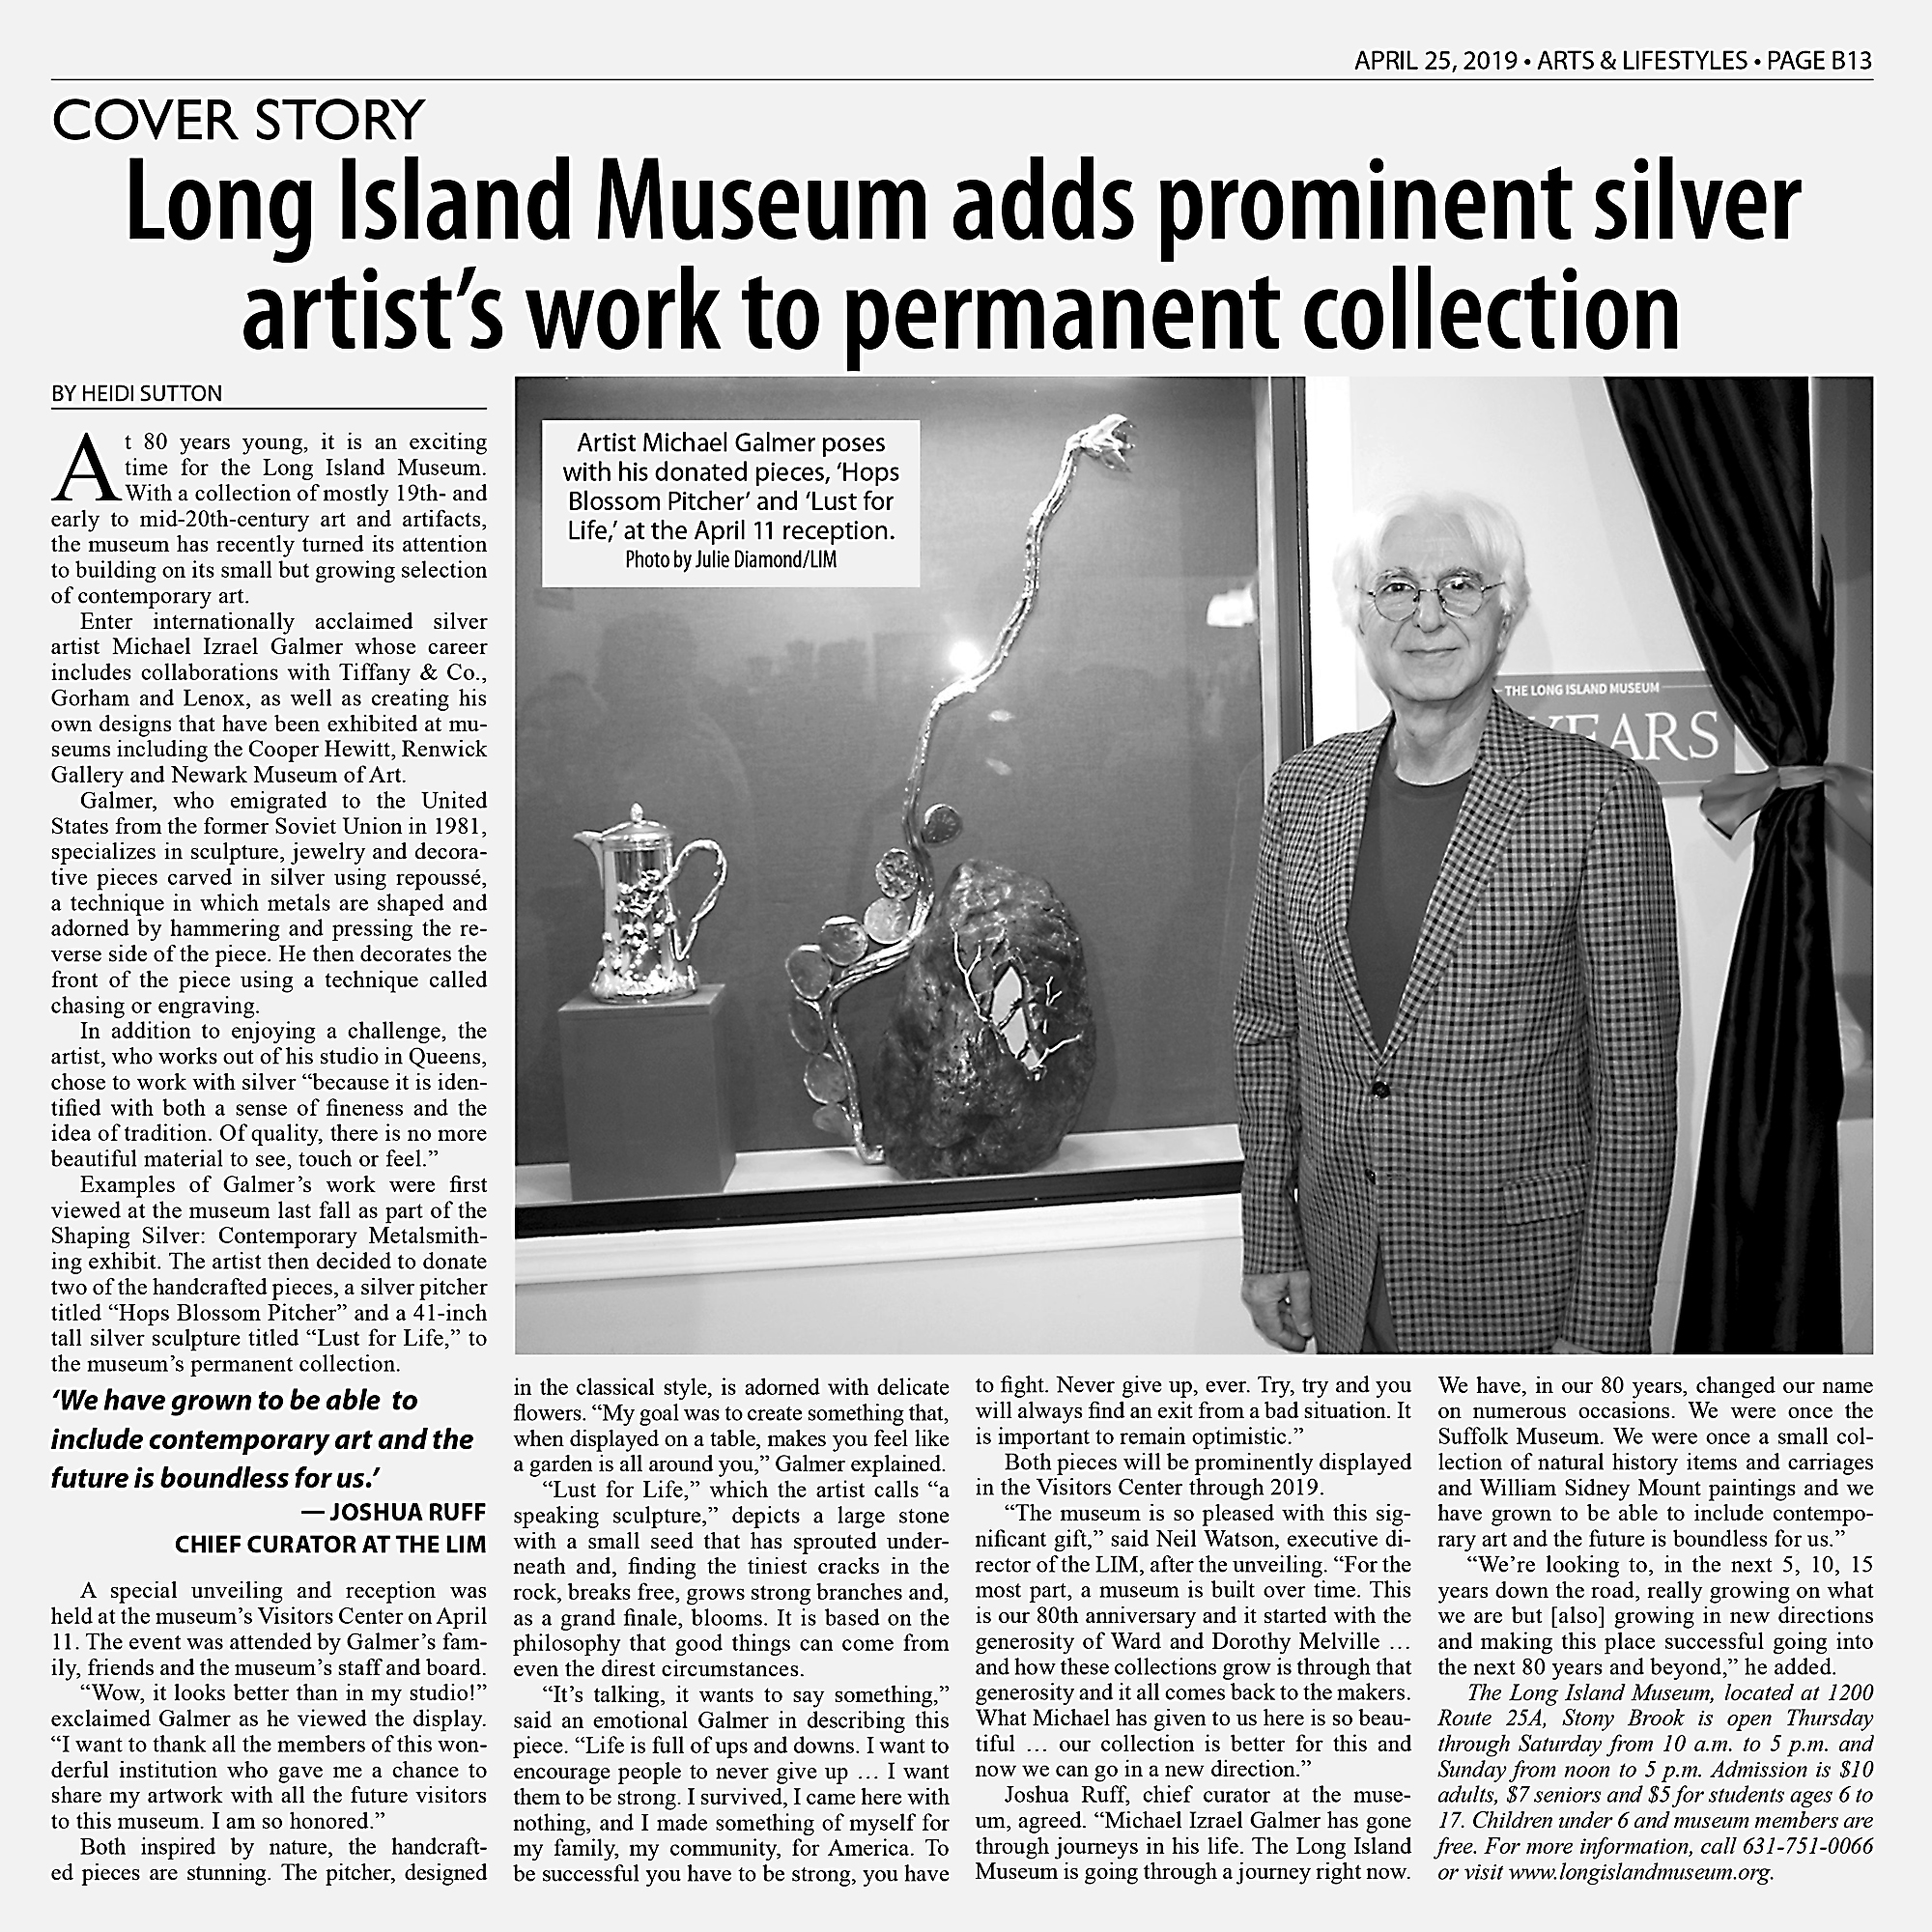 Scan of article 'Long Island Museum adds prominent silver artist's work to permanent collection.'